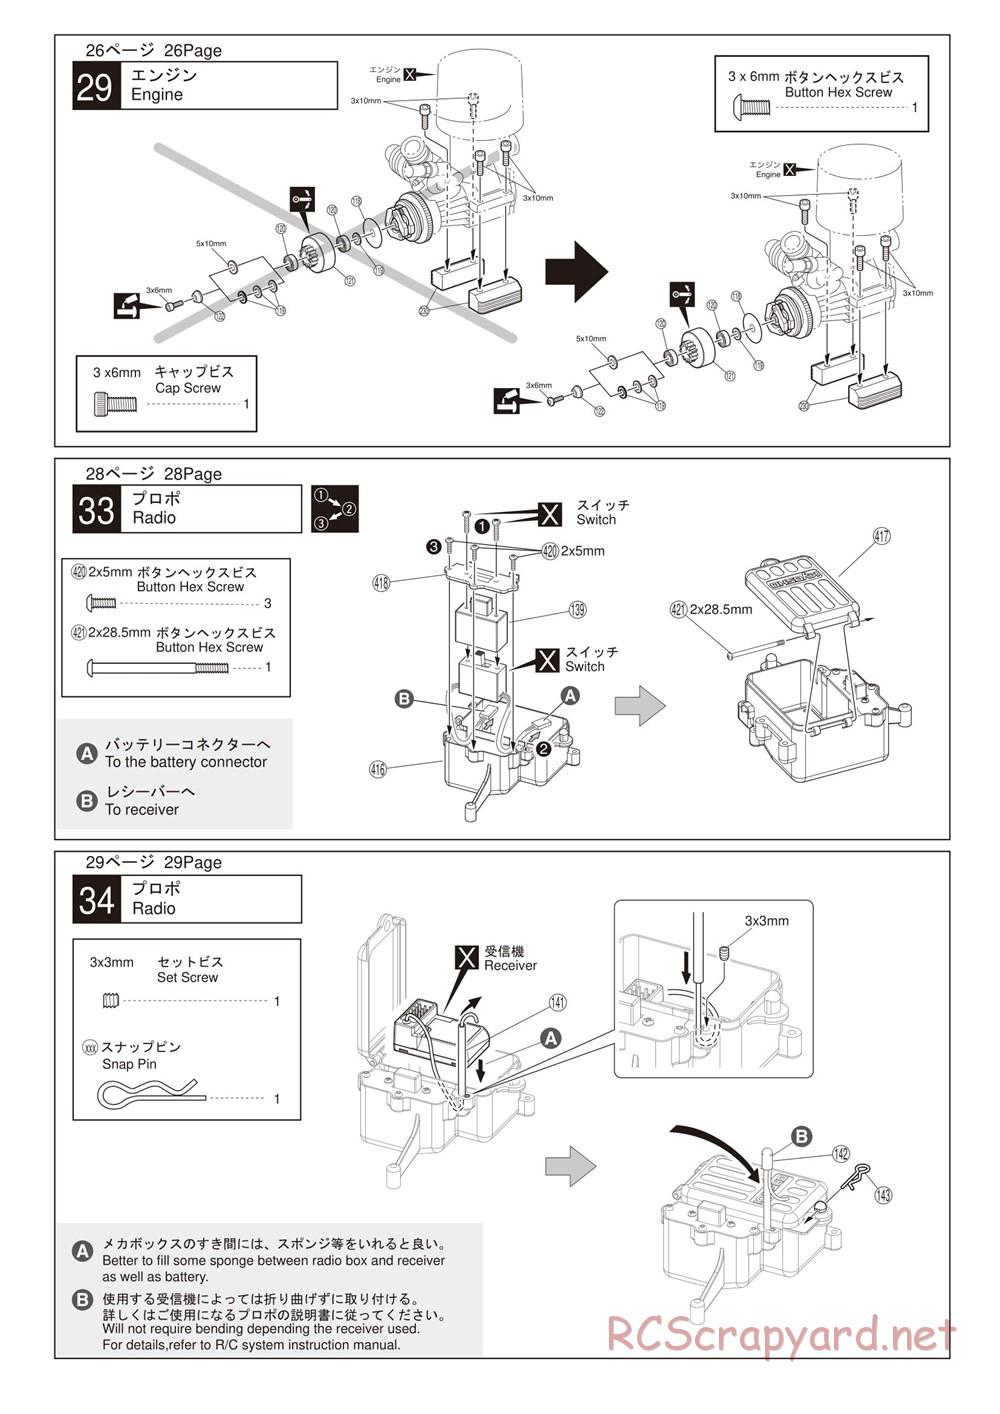 Kyosho - Inferno ST-RR Evo.2 - Manual - Page 2